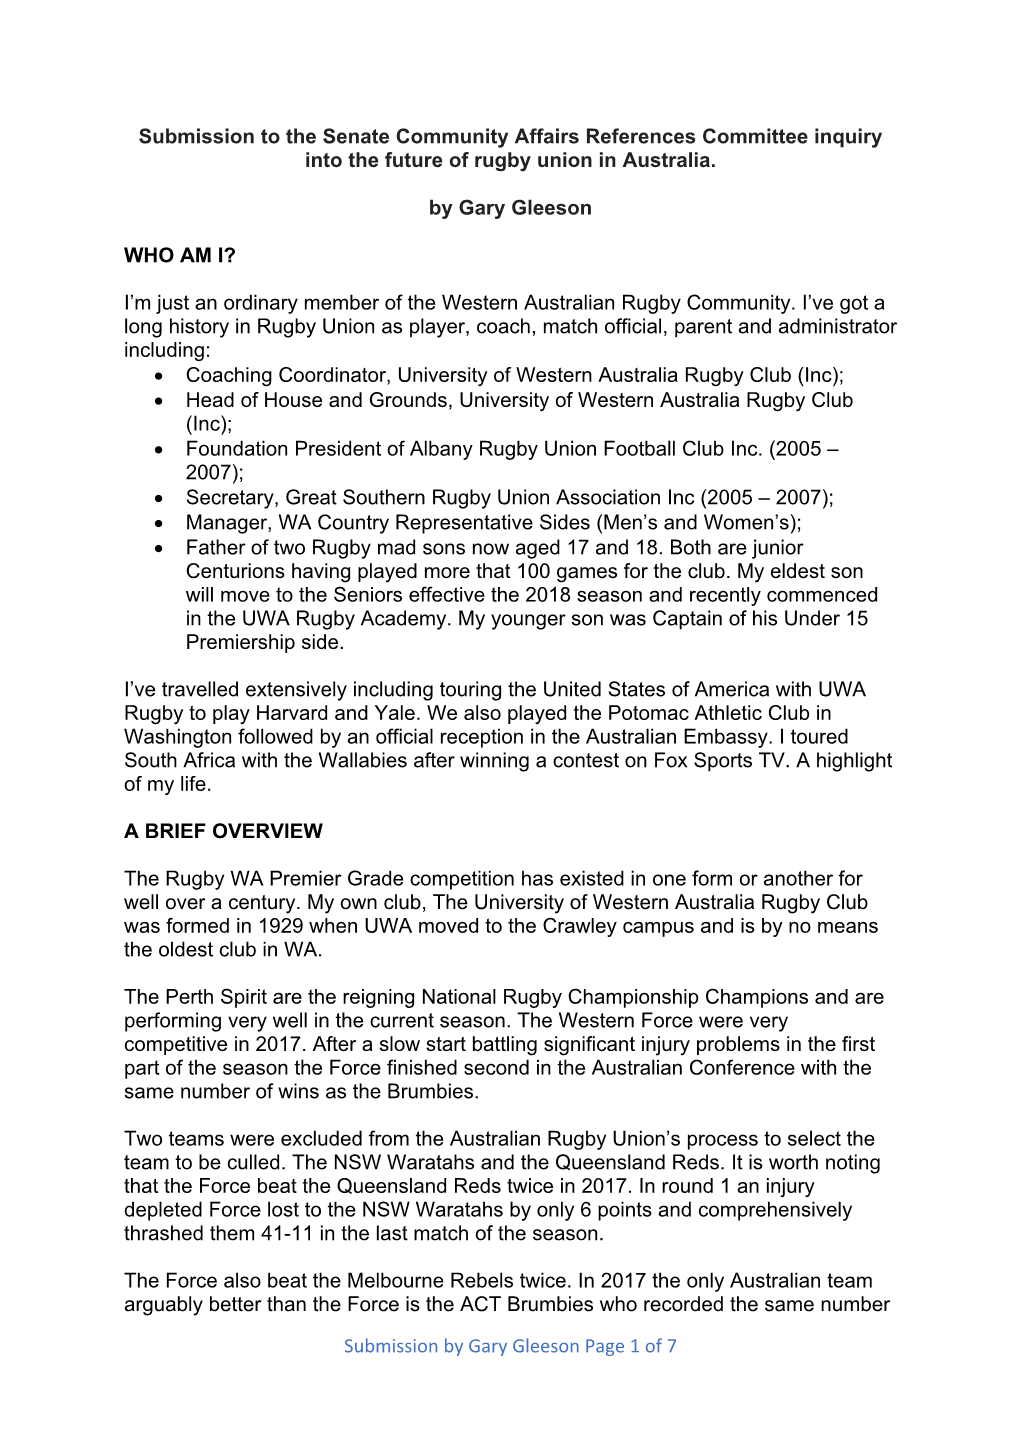 Submission by Gary Gleeson Page 1 of 7 Submission to the Senate